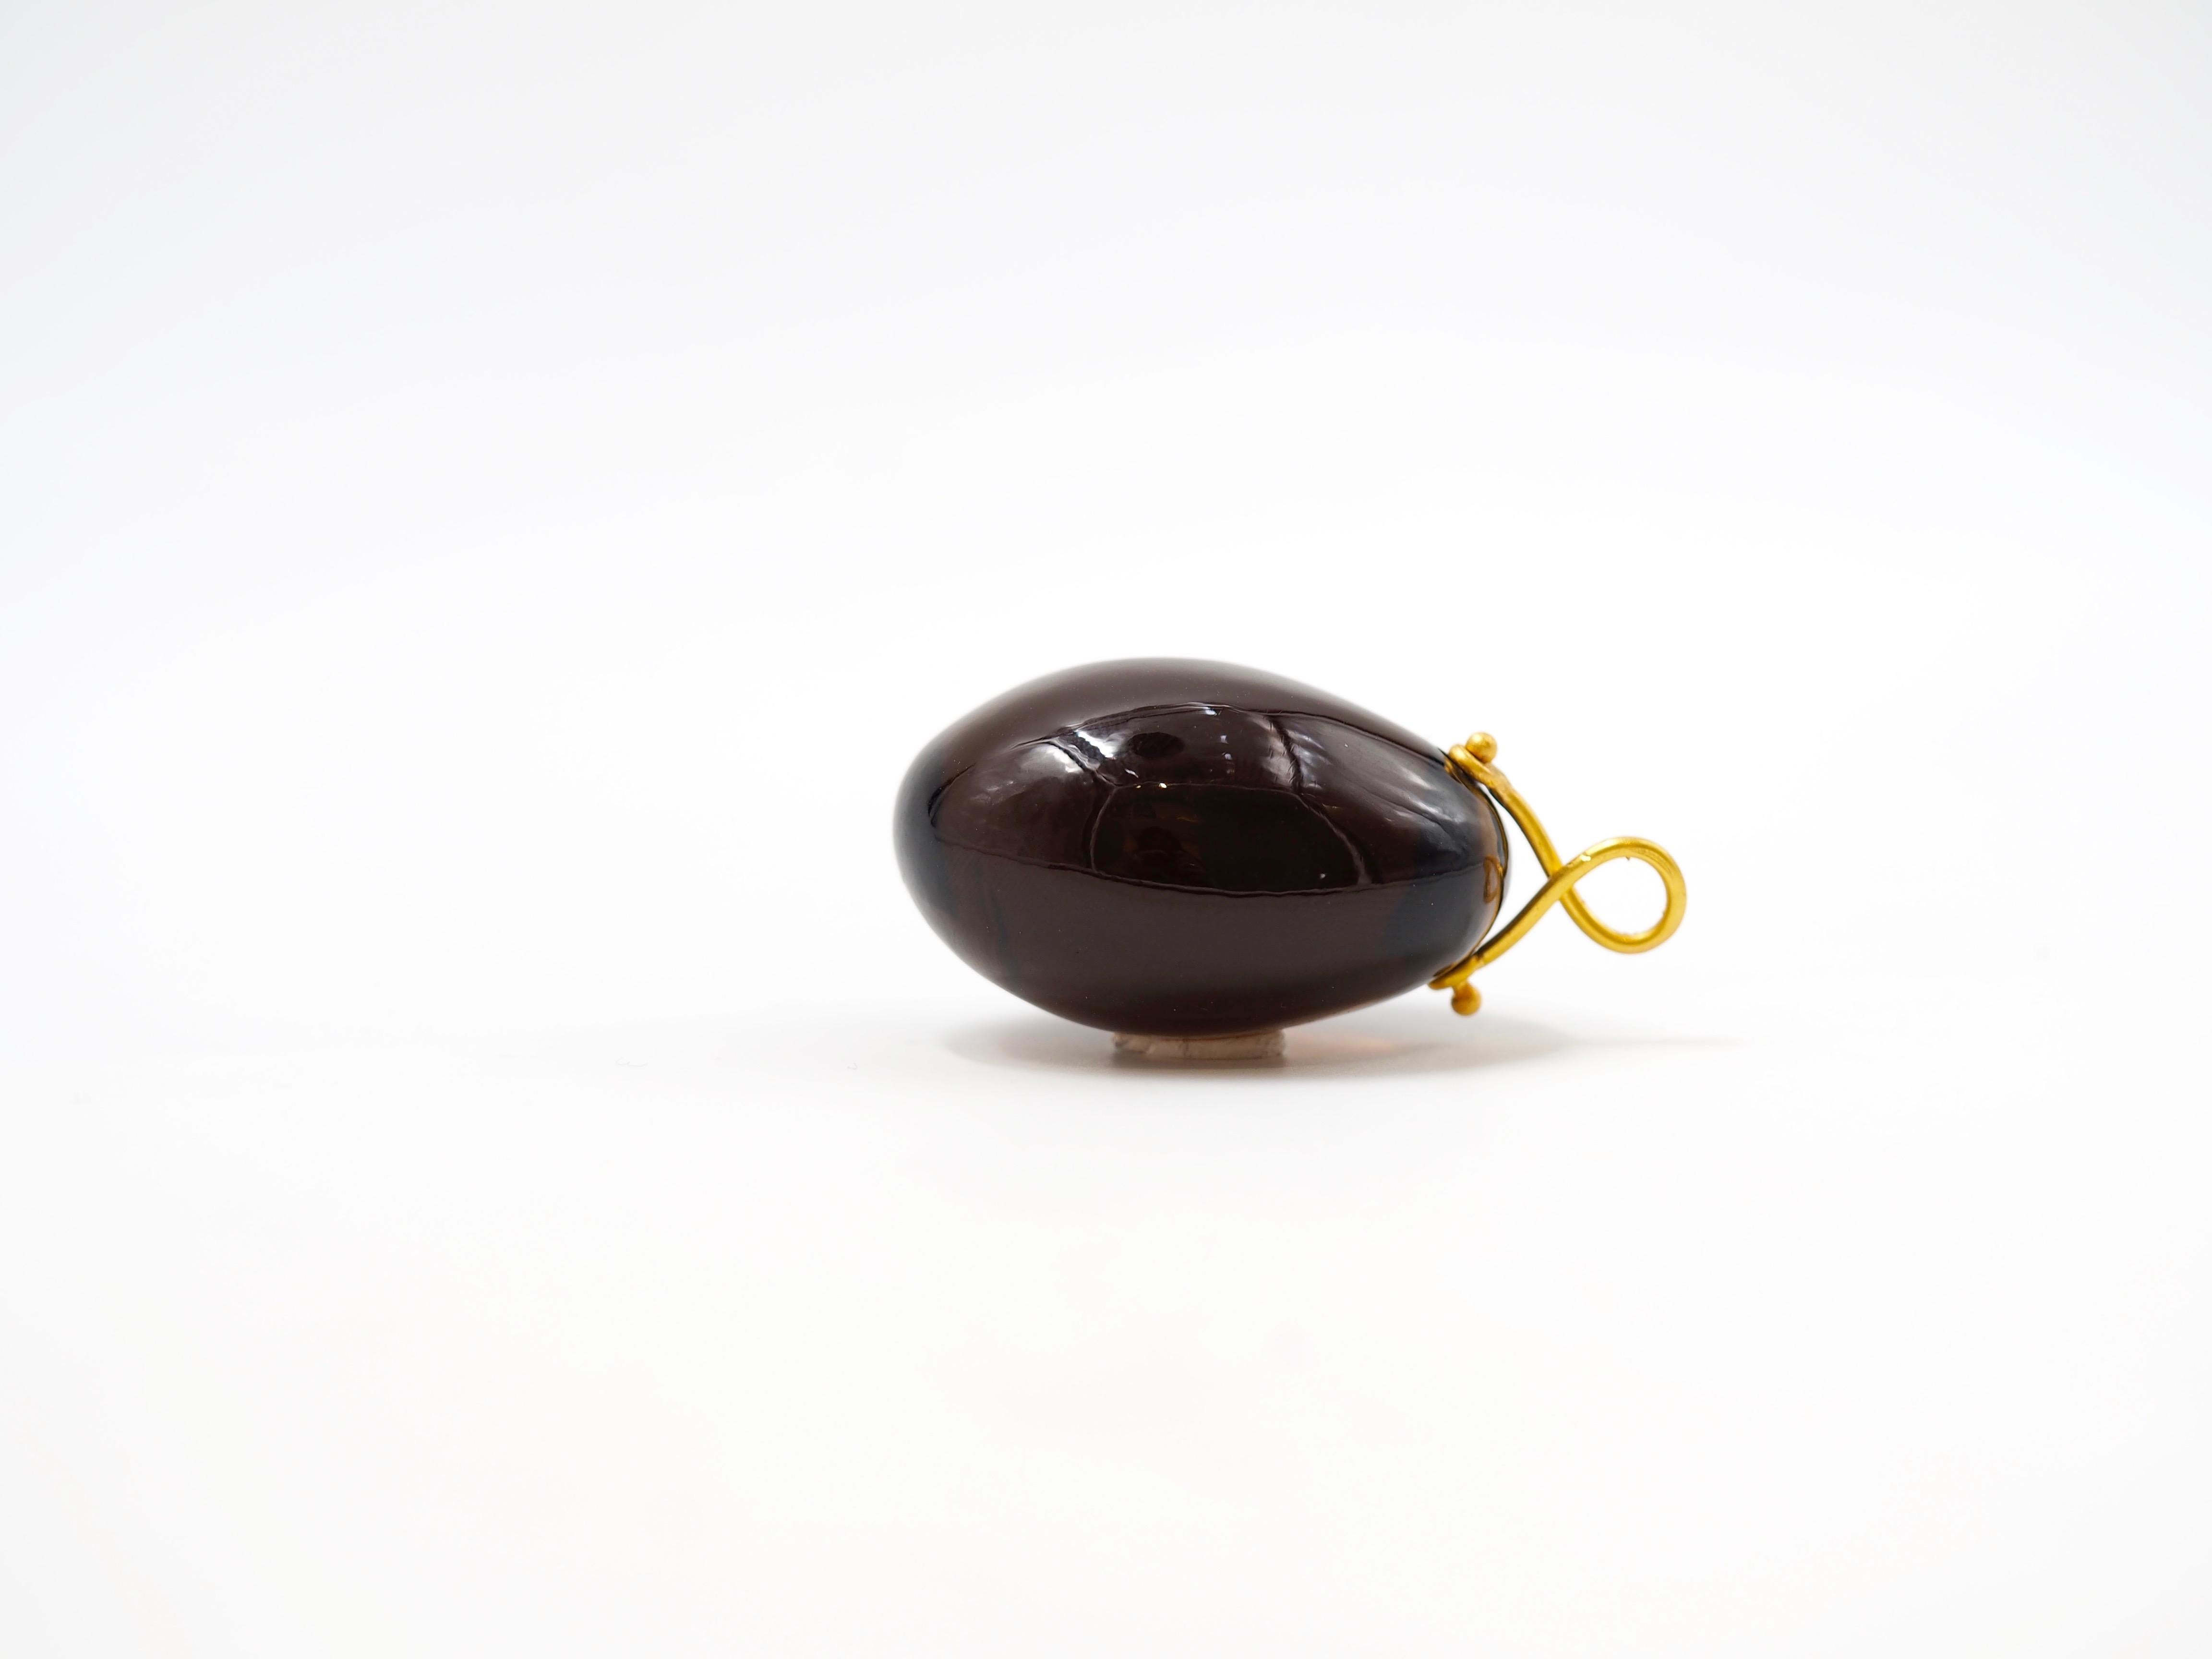 Hand-carved and handmade pendant, this stone is simply drilled to allow a 22 karat gold wire that is twisted to make a ring. 
This large pendant has a smoky quartz of approx 140 carats. 
3 stone sizes exist as you can see on the photo. 
The stone